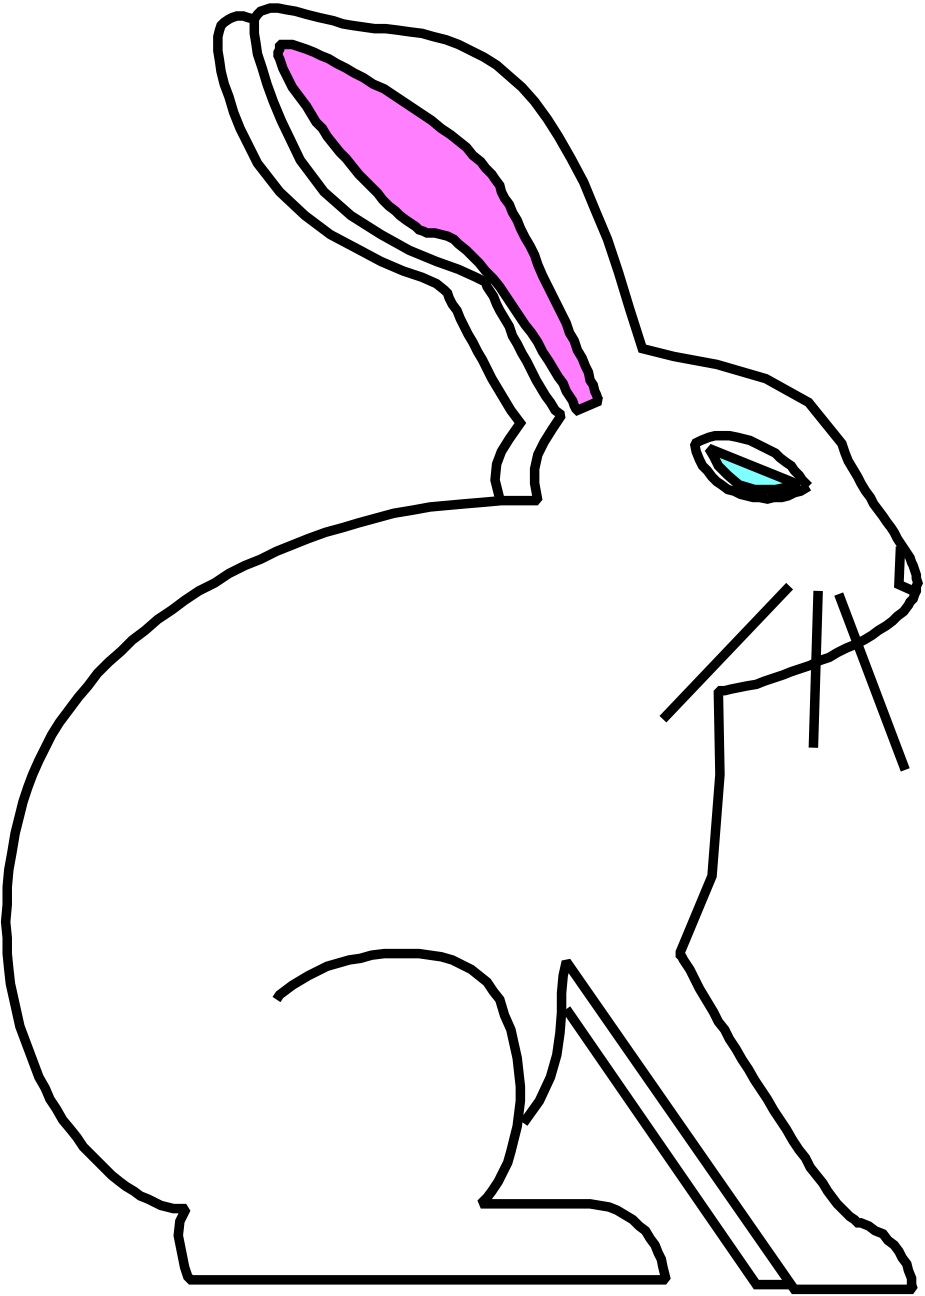 Cartoon Picture Of A Rabbit - ClipArt Best